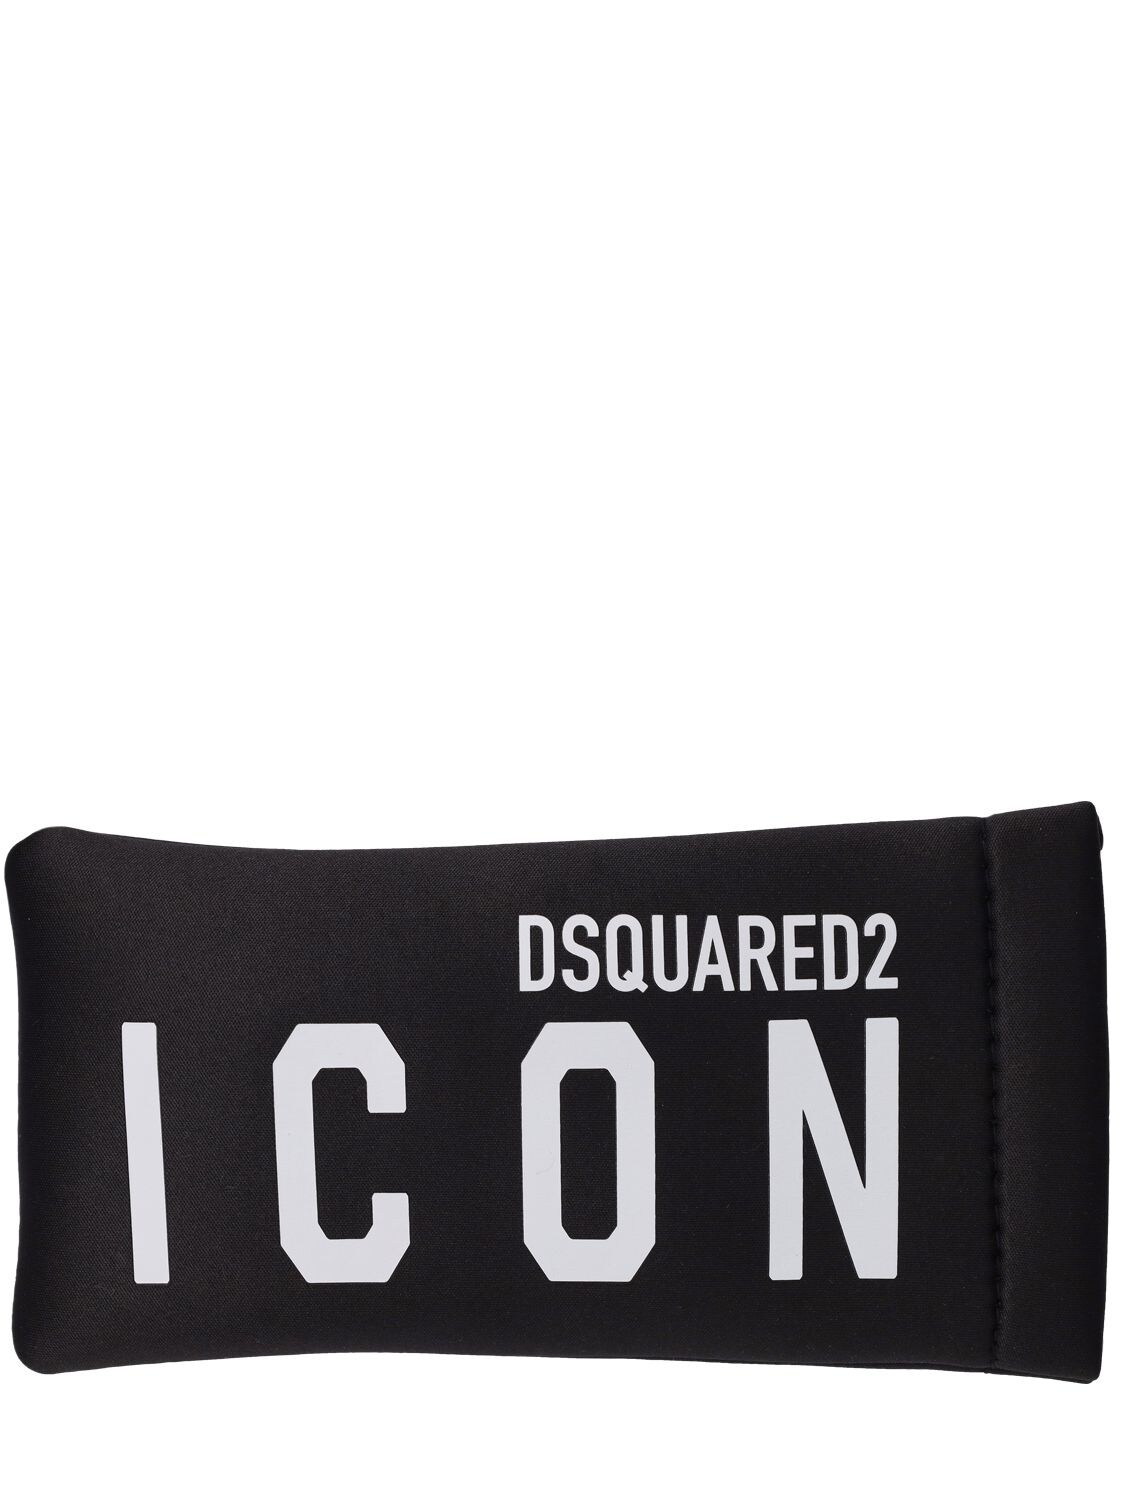 Shop Dsquared2 D2 Icon Squared Sunglasses In Red,grey